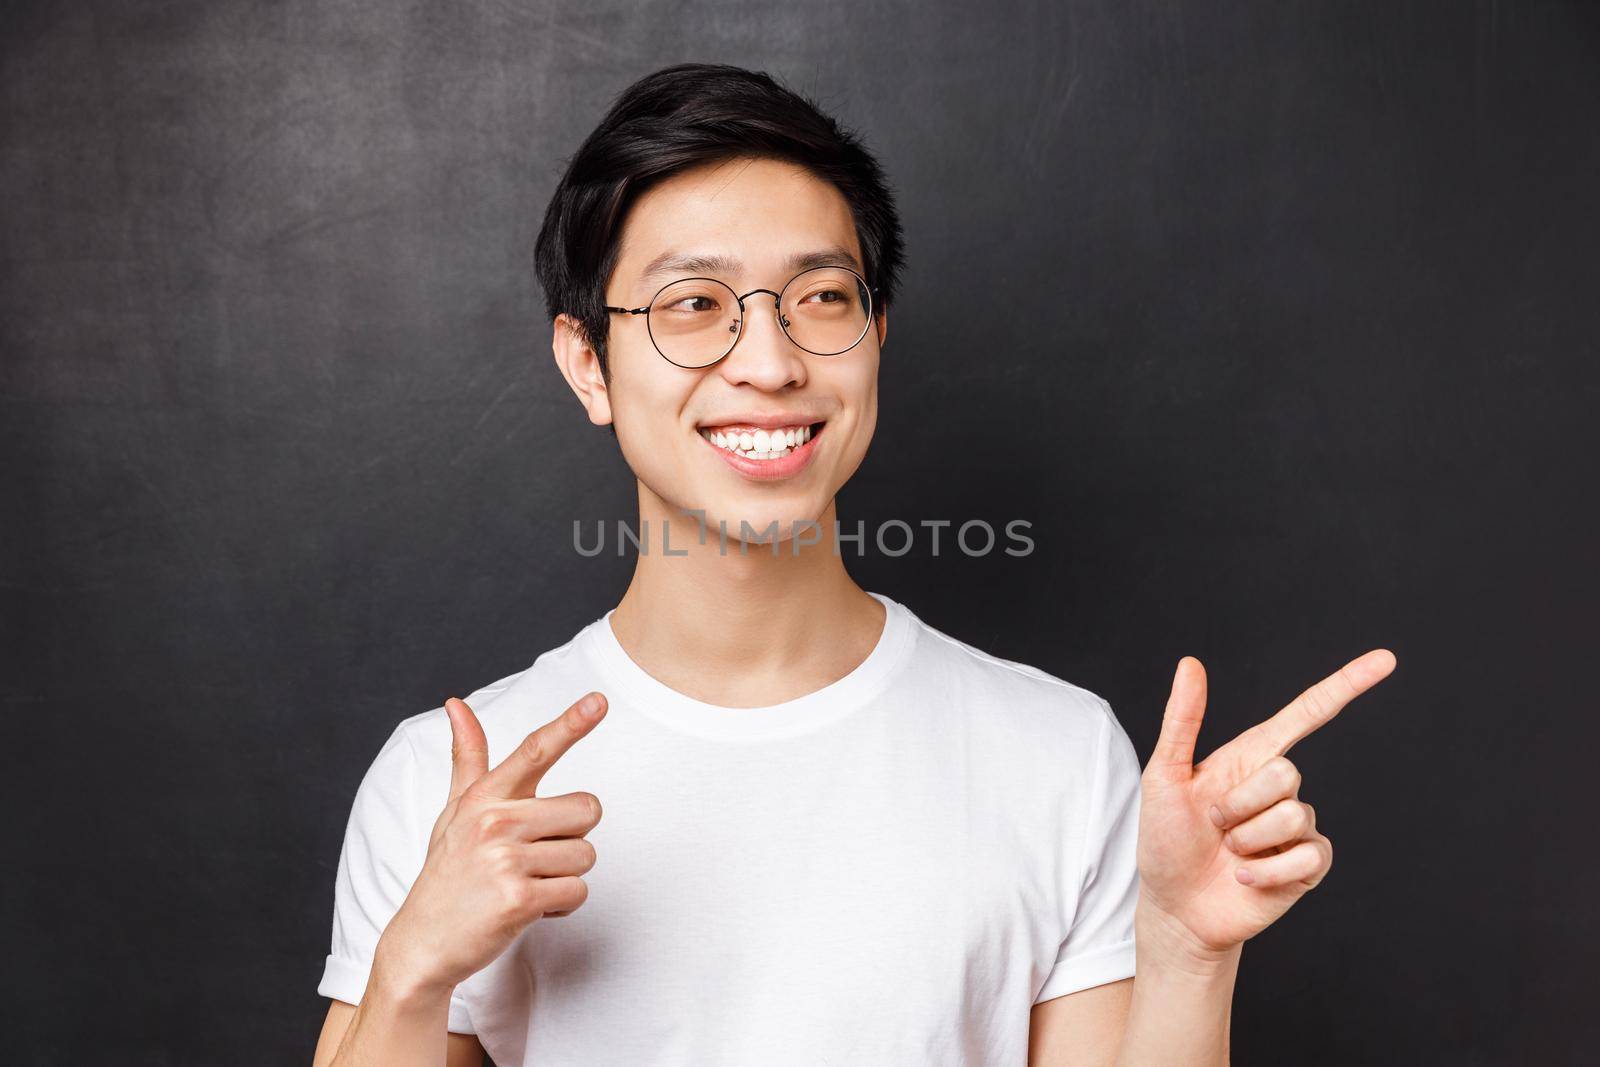 Close-up portrait of good-looking asian man in white t-shirt and glasses, spot friend on other side of room, pointing finger pistols at right side, smiling saying hi, informal greeting concept.